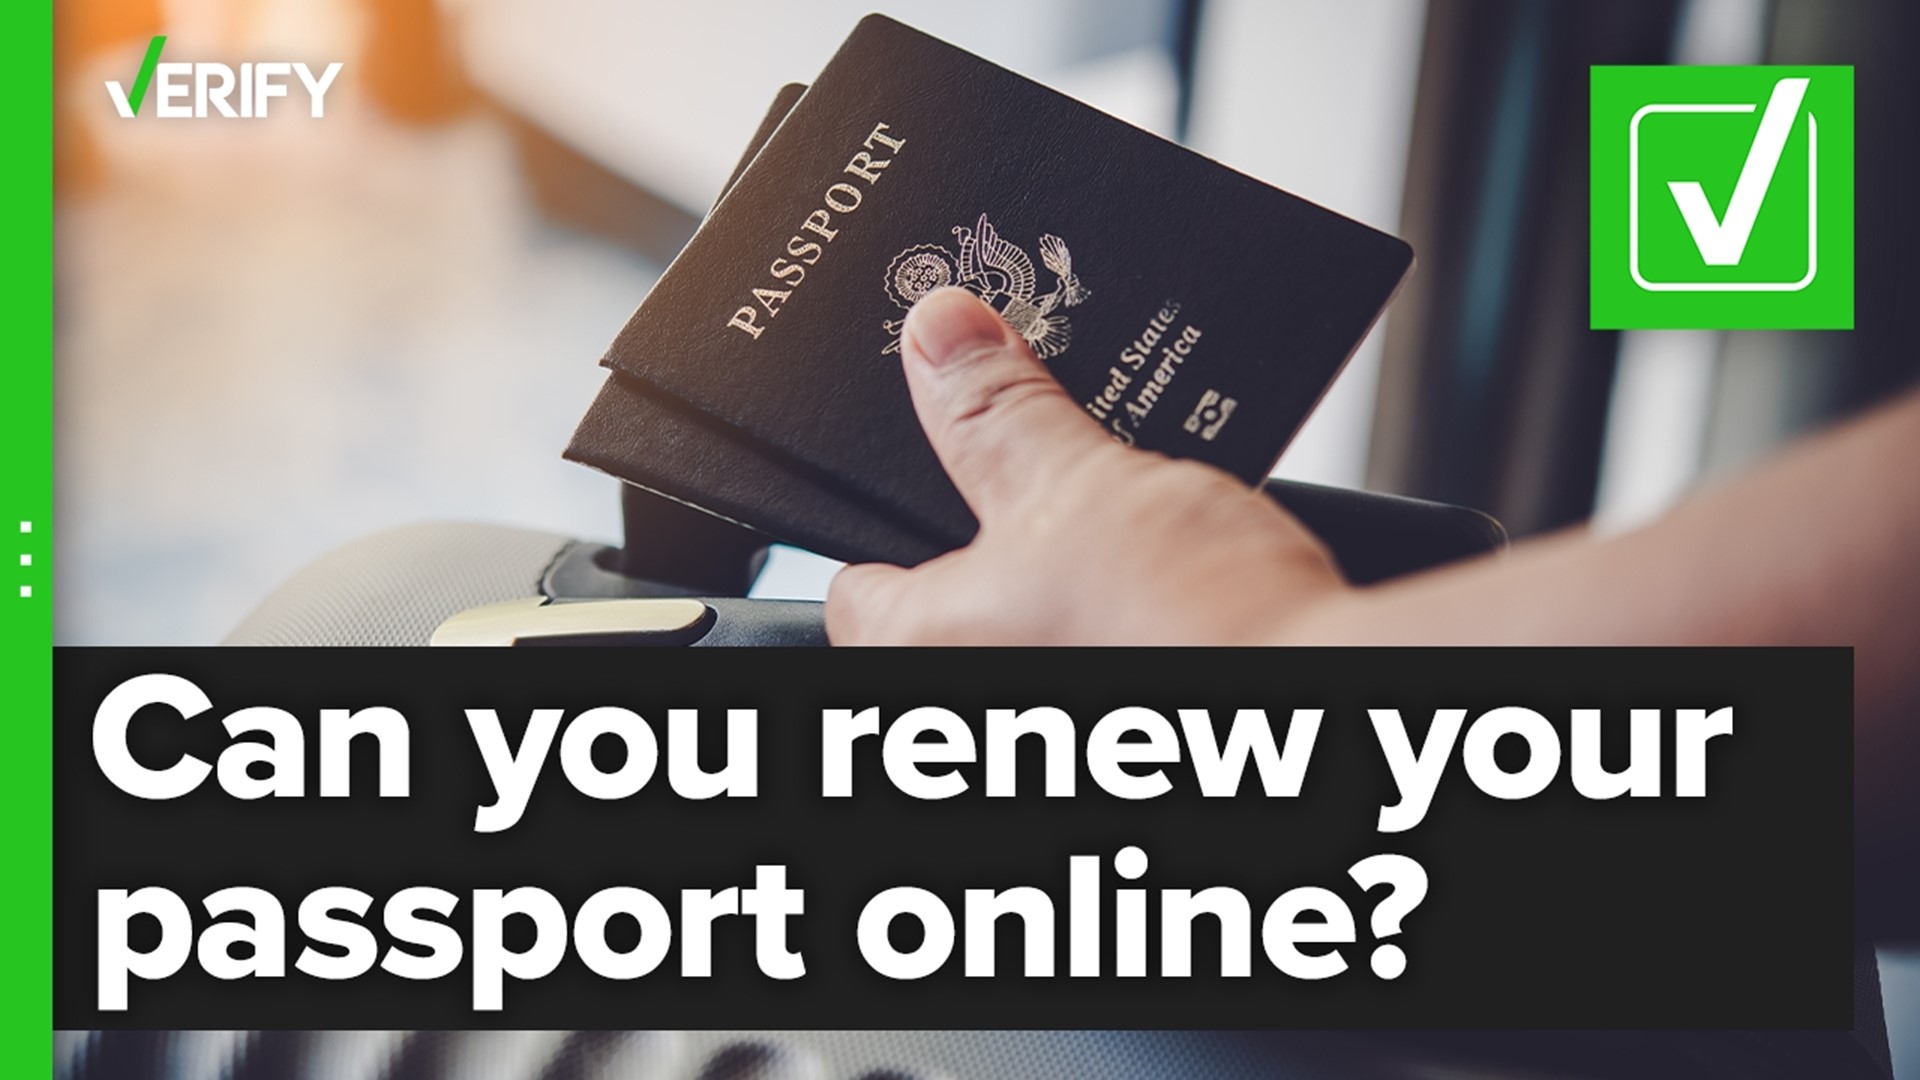 The State Department is testing online passport renewals through limited time pilot programs. Online renewals must meet certain conditions.